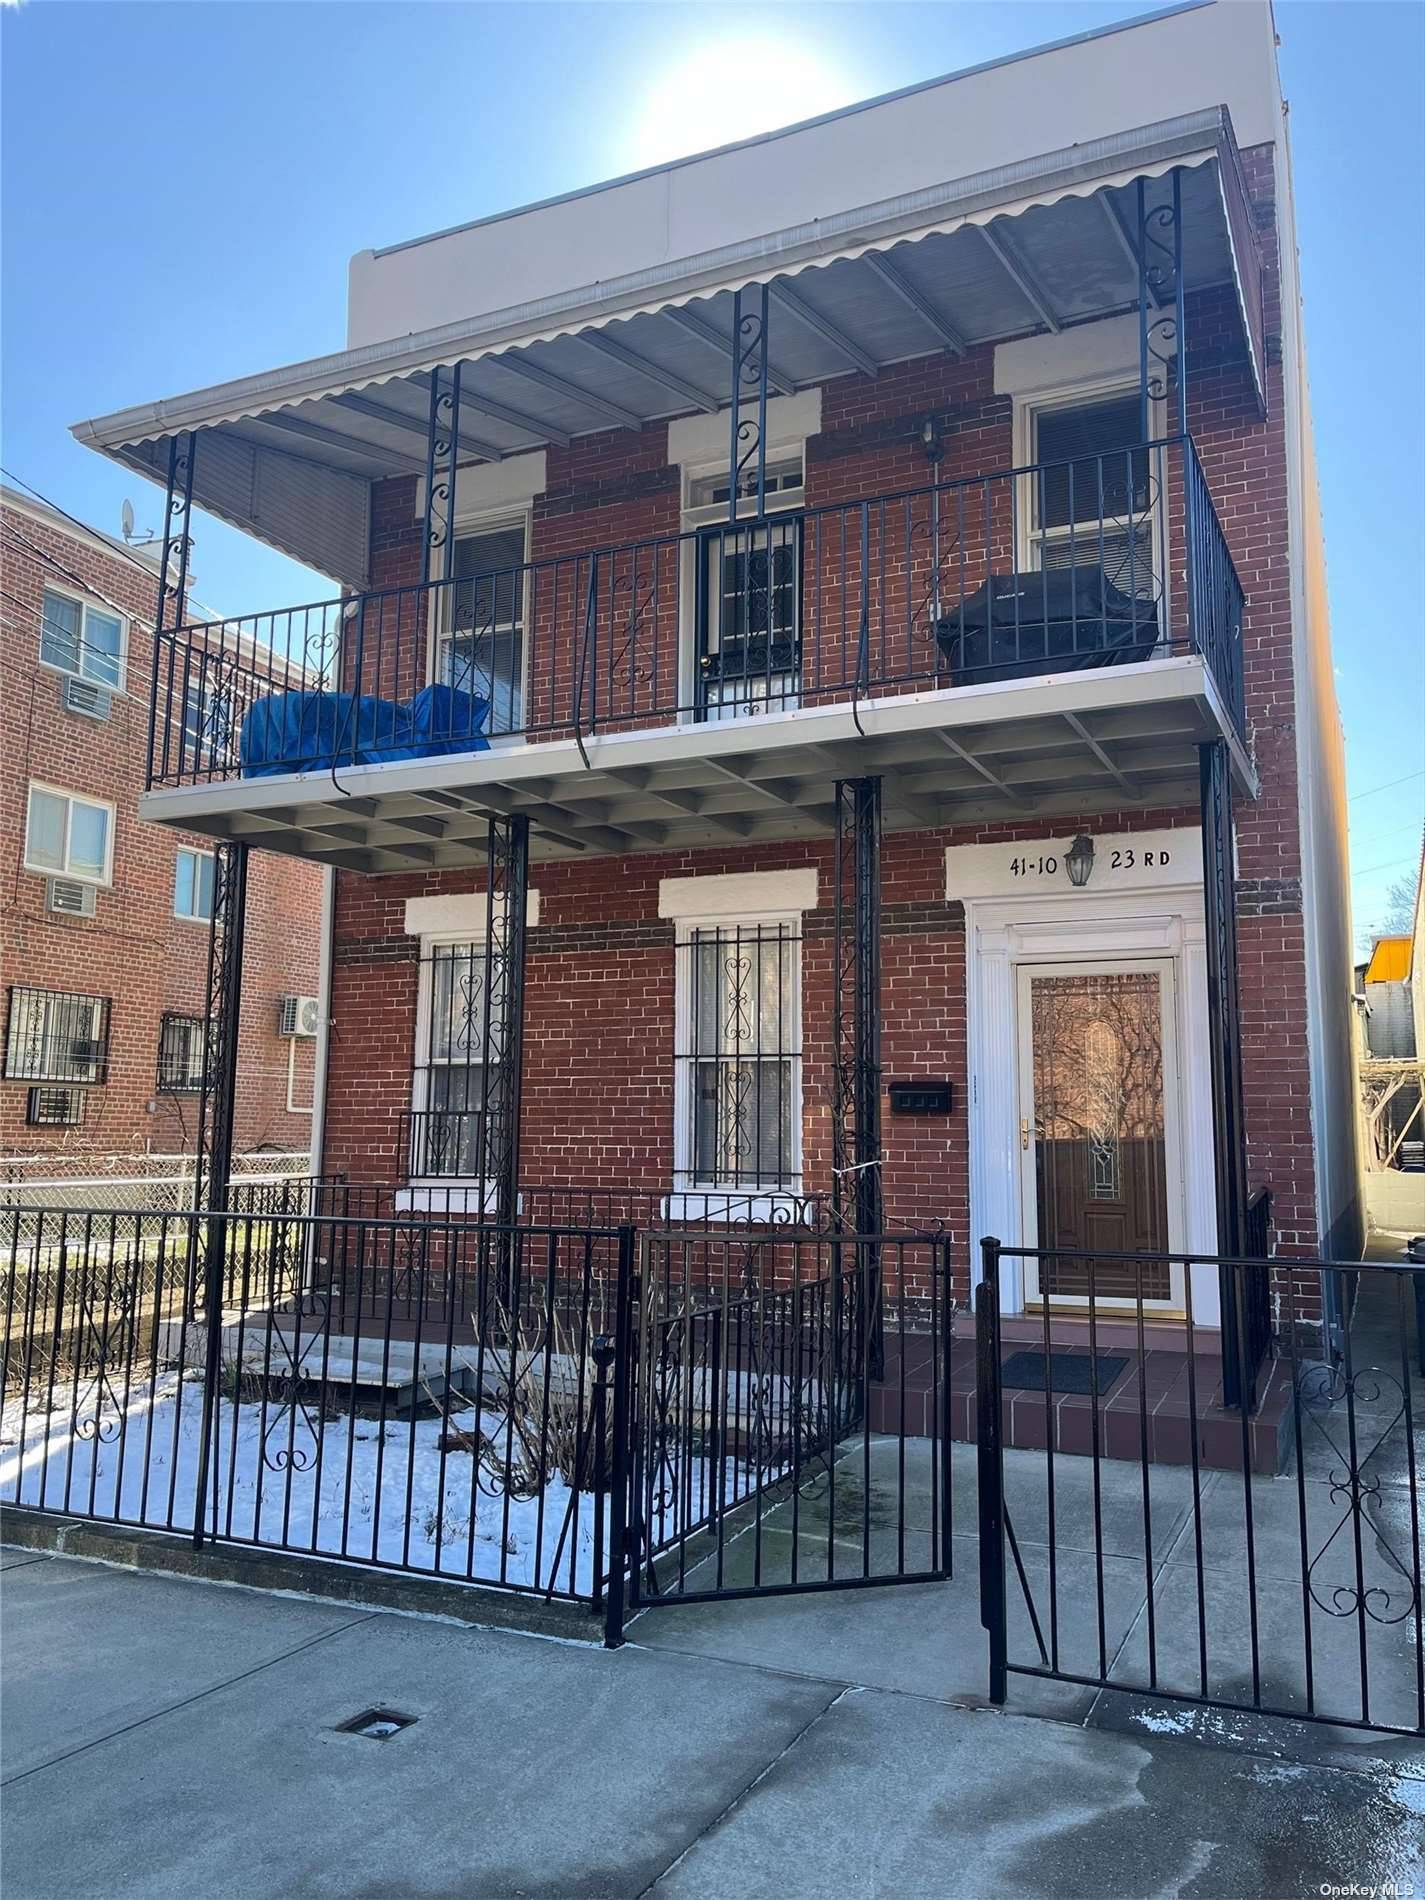 3 Family Detached Brick, 2 families on the front of the lot, with a one bedroom separate dwelling in the back of the lot, legal 3 family dwelling.